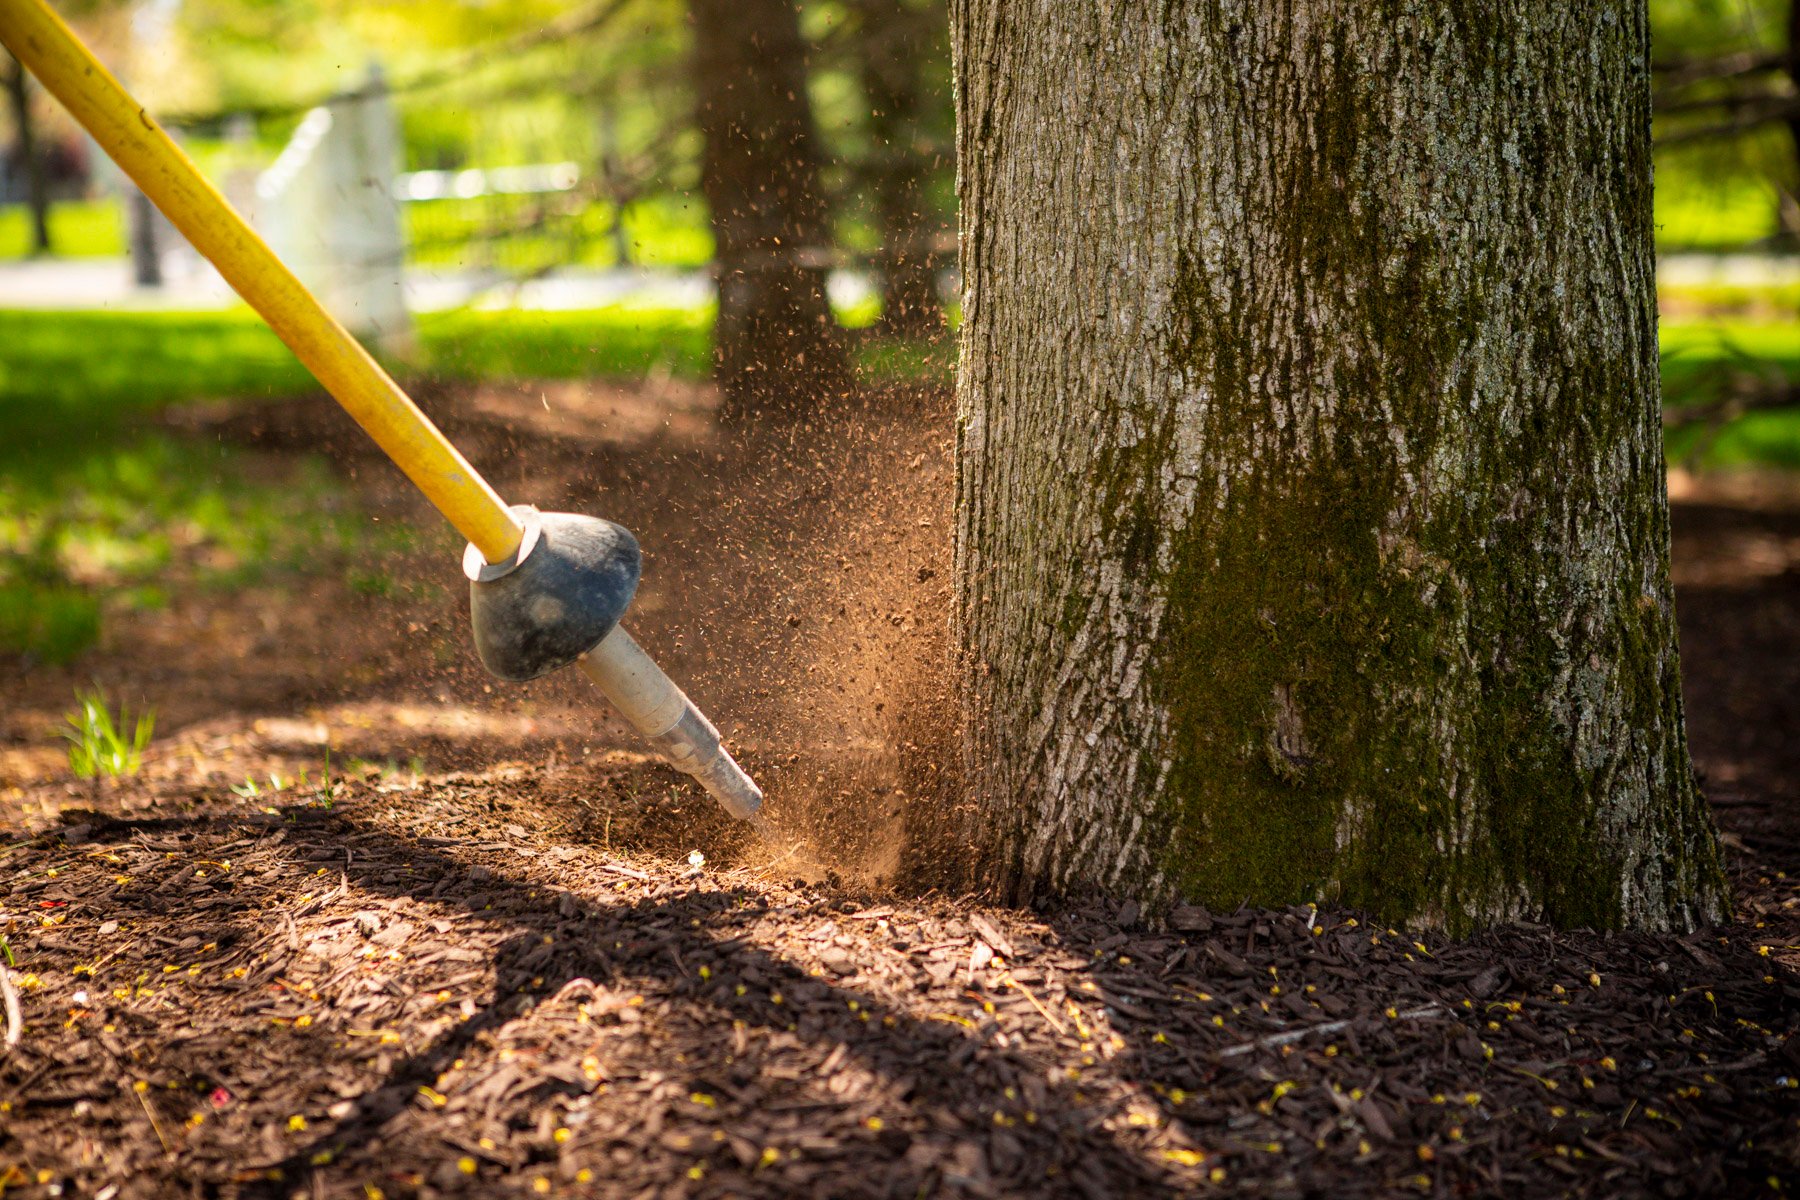 arborist tree care technician performing root collar excavation with an air spade